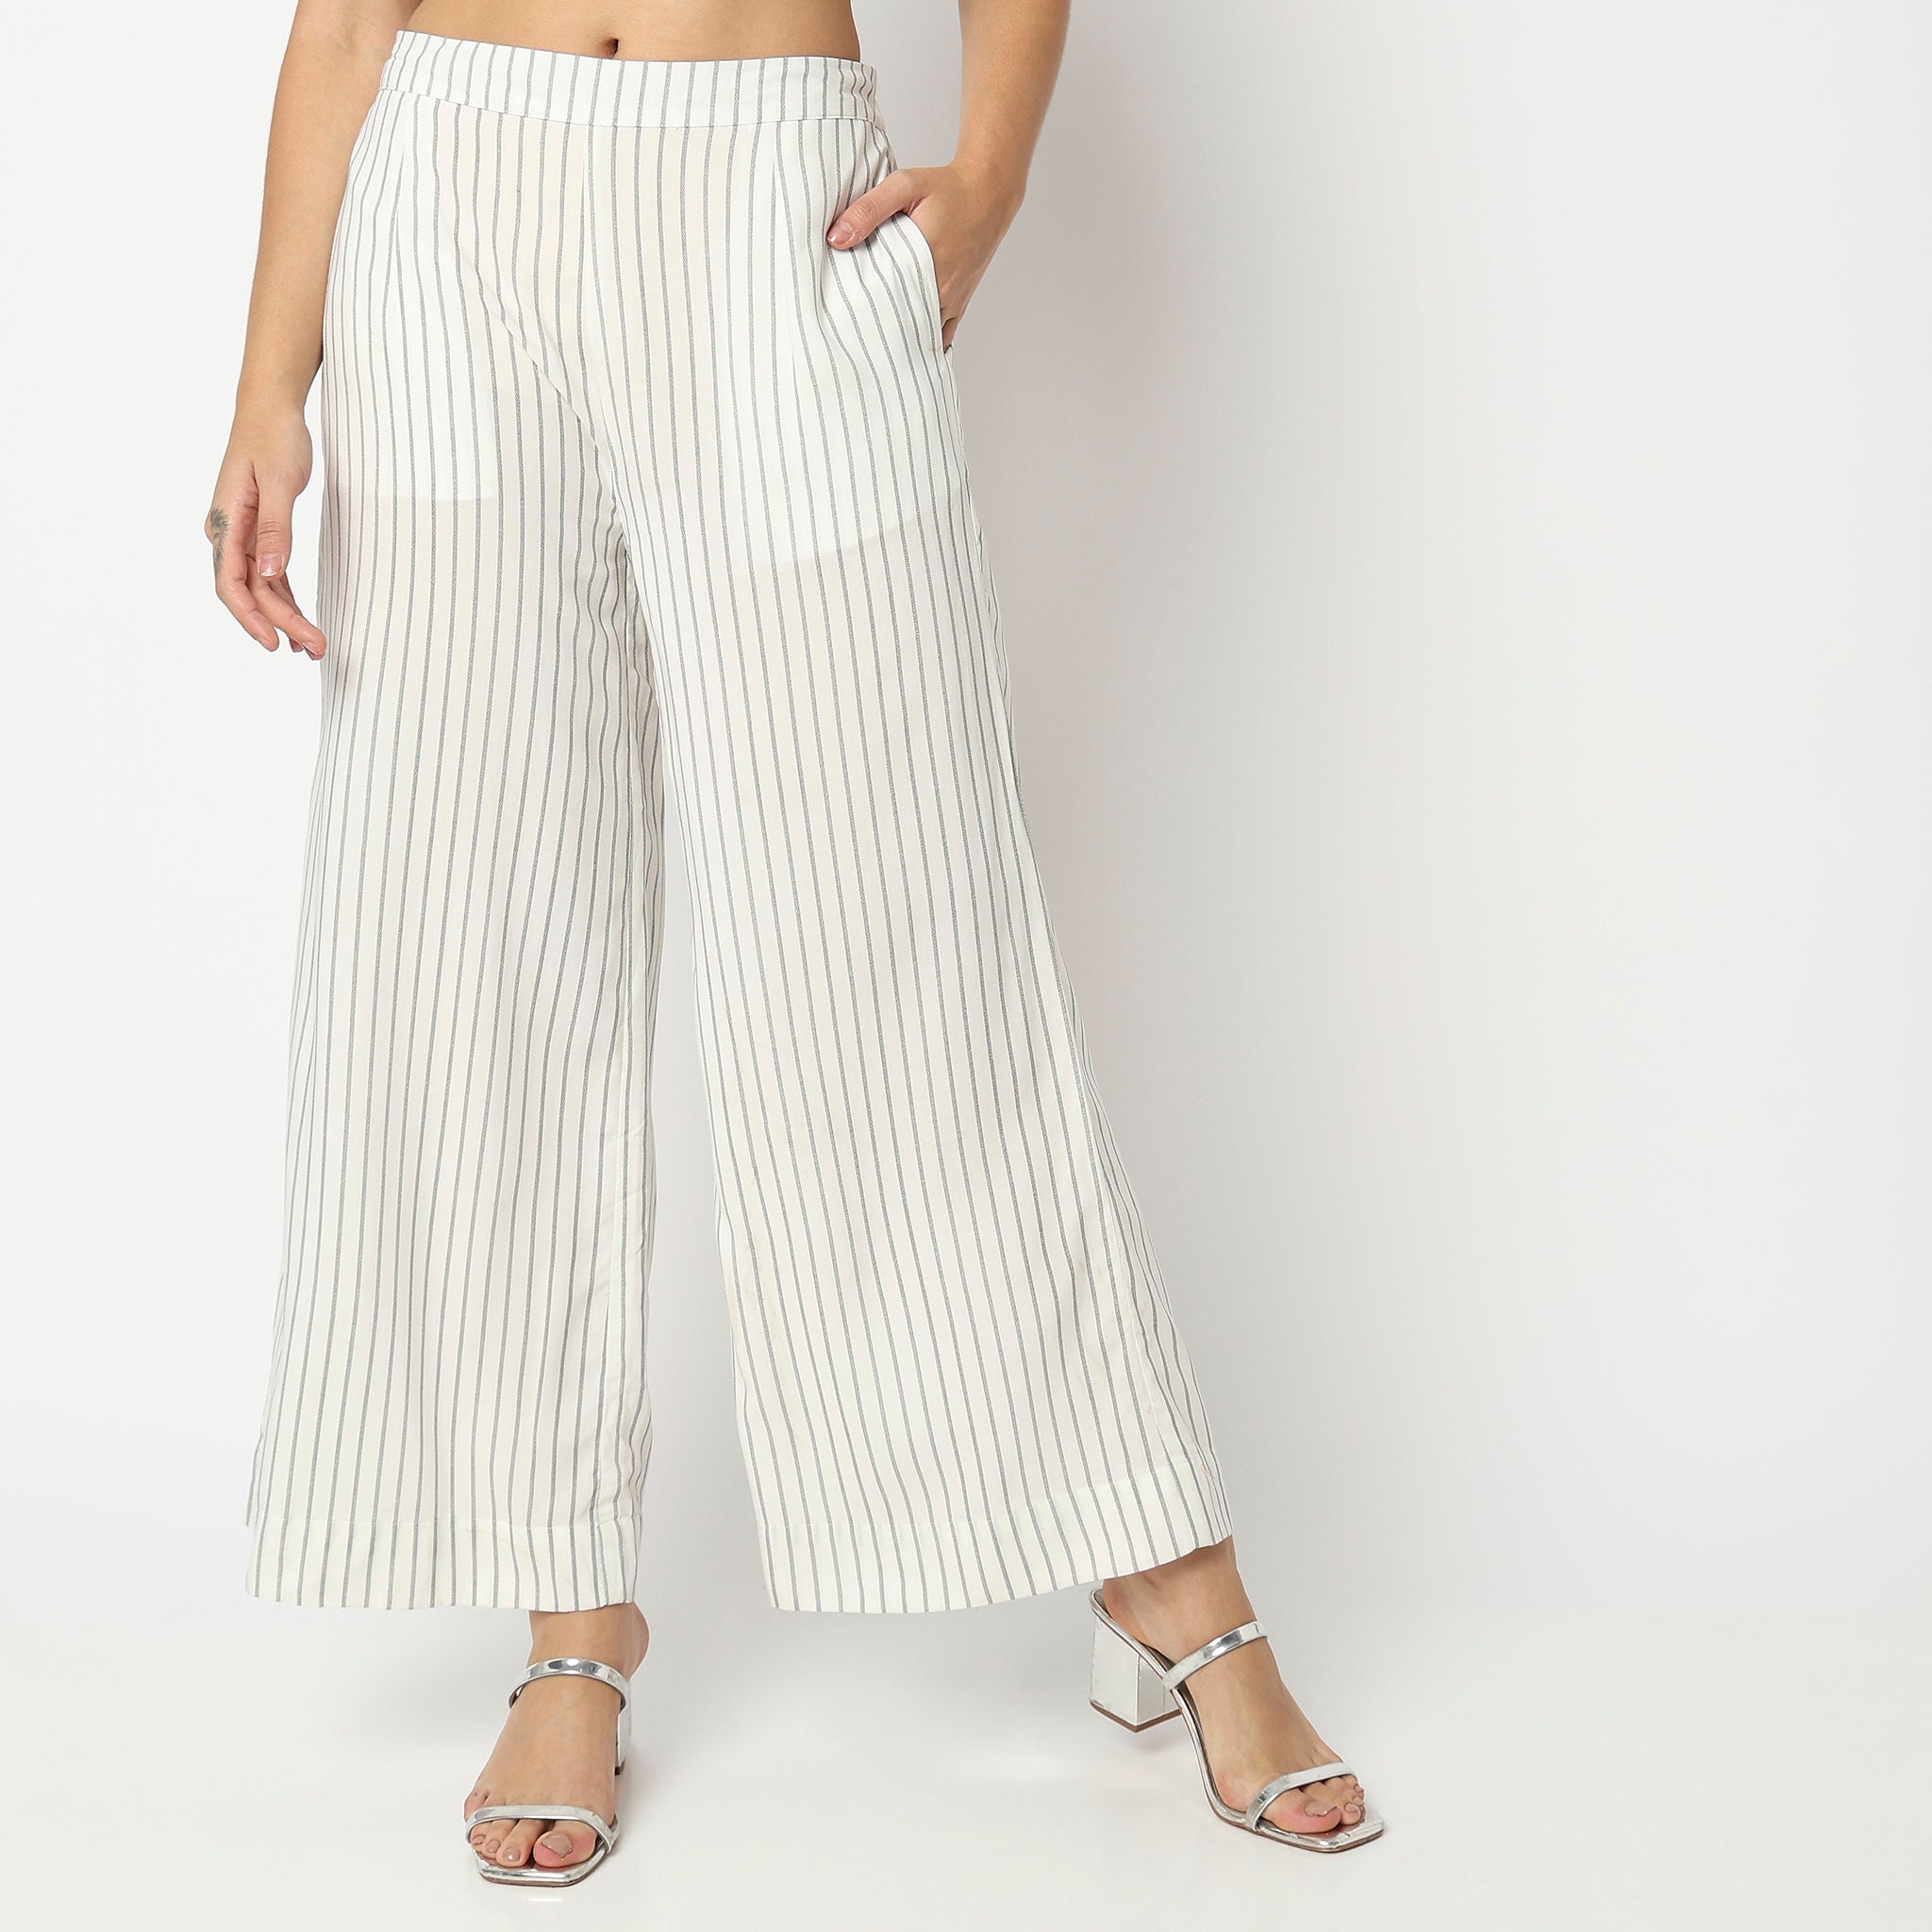 Women Wearing Flare Fit Striped High Rise Palazzo